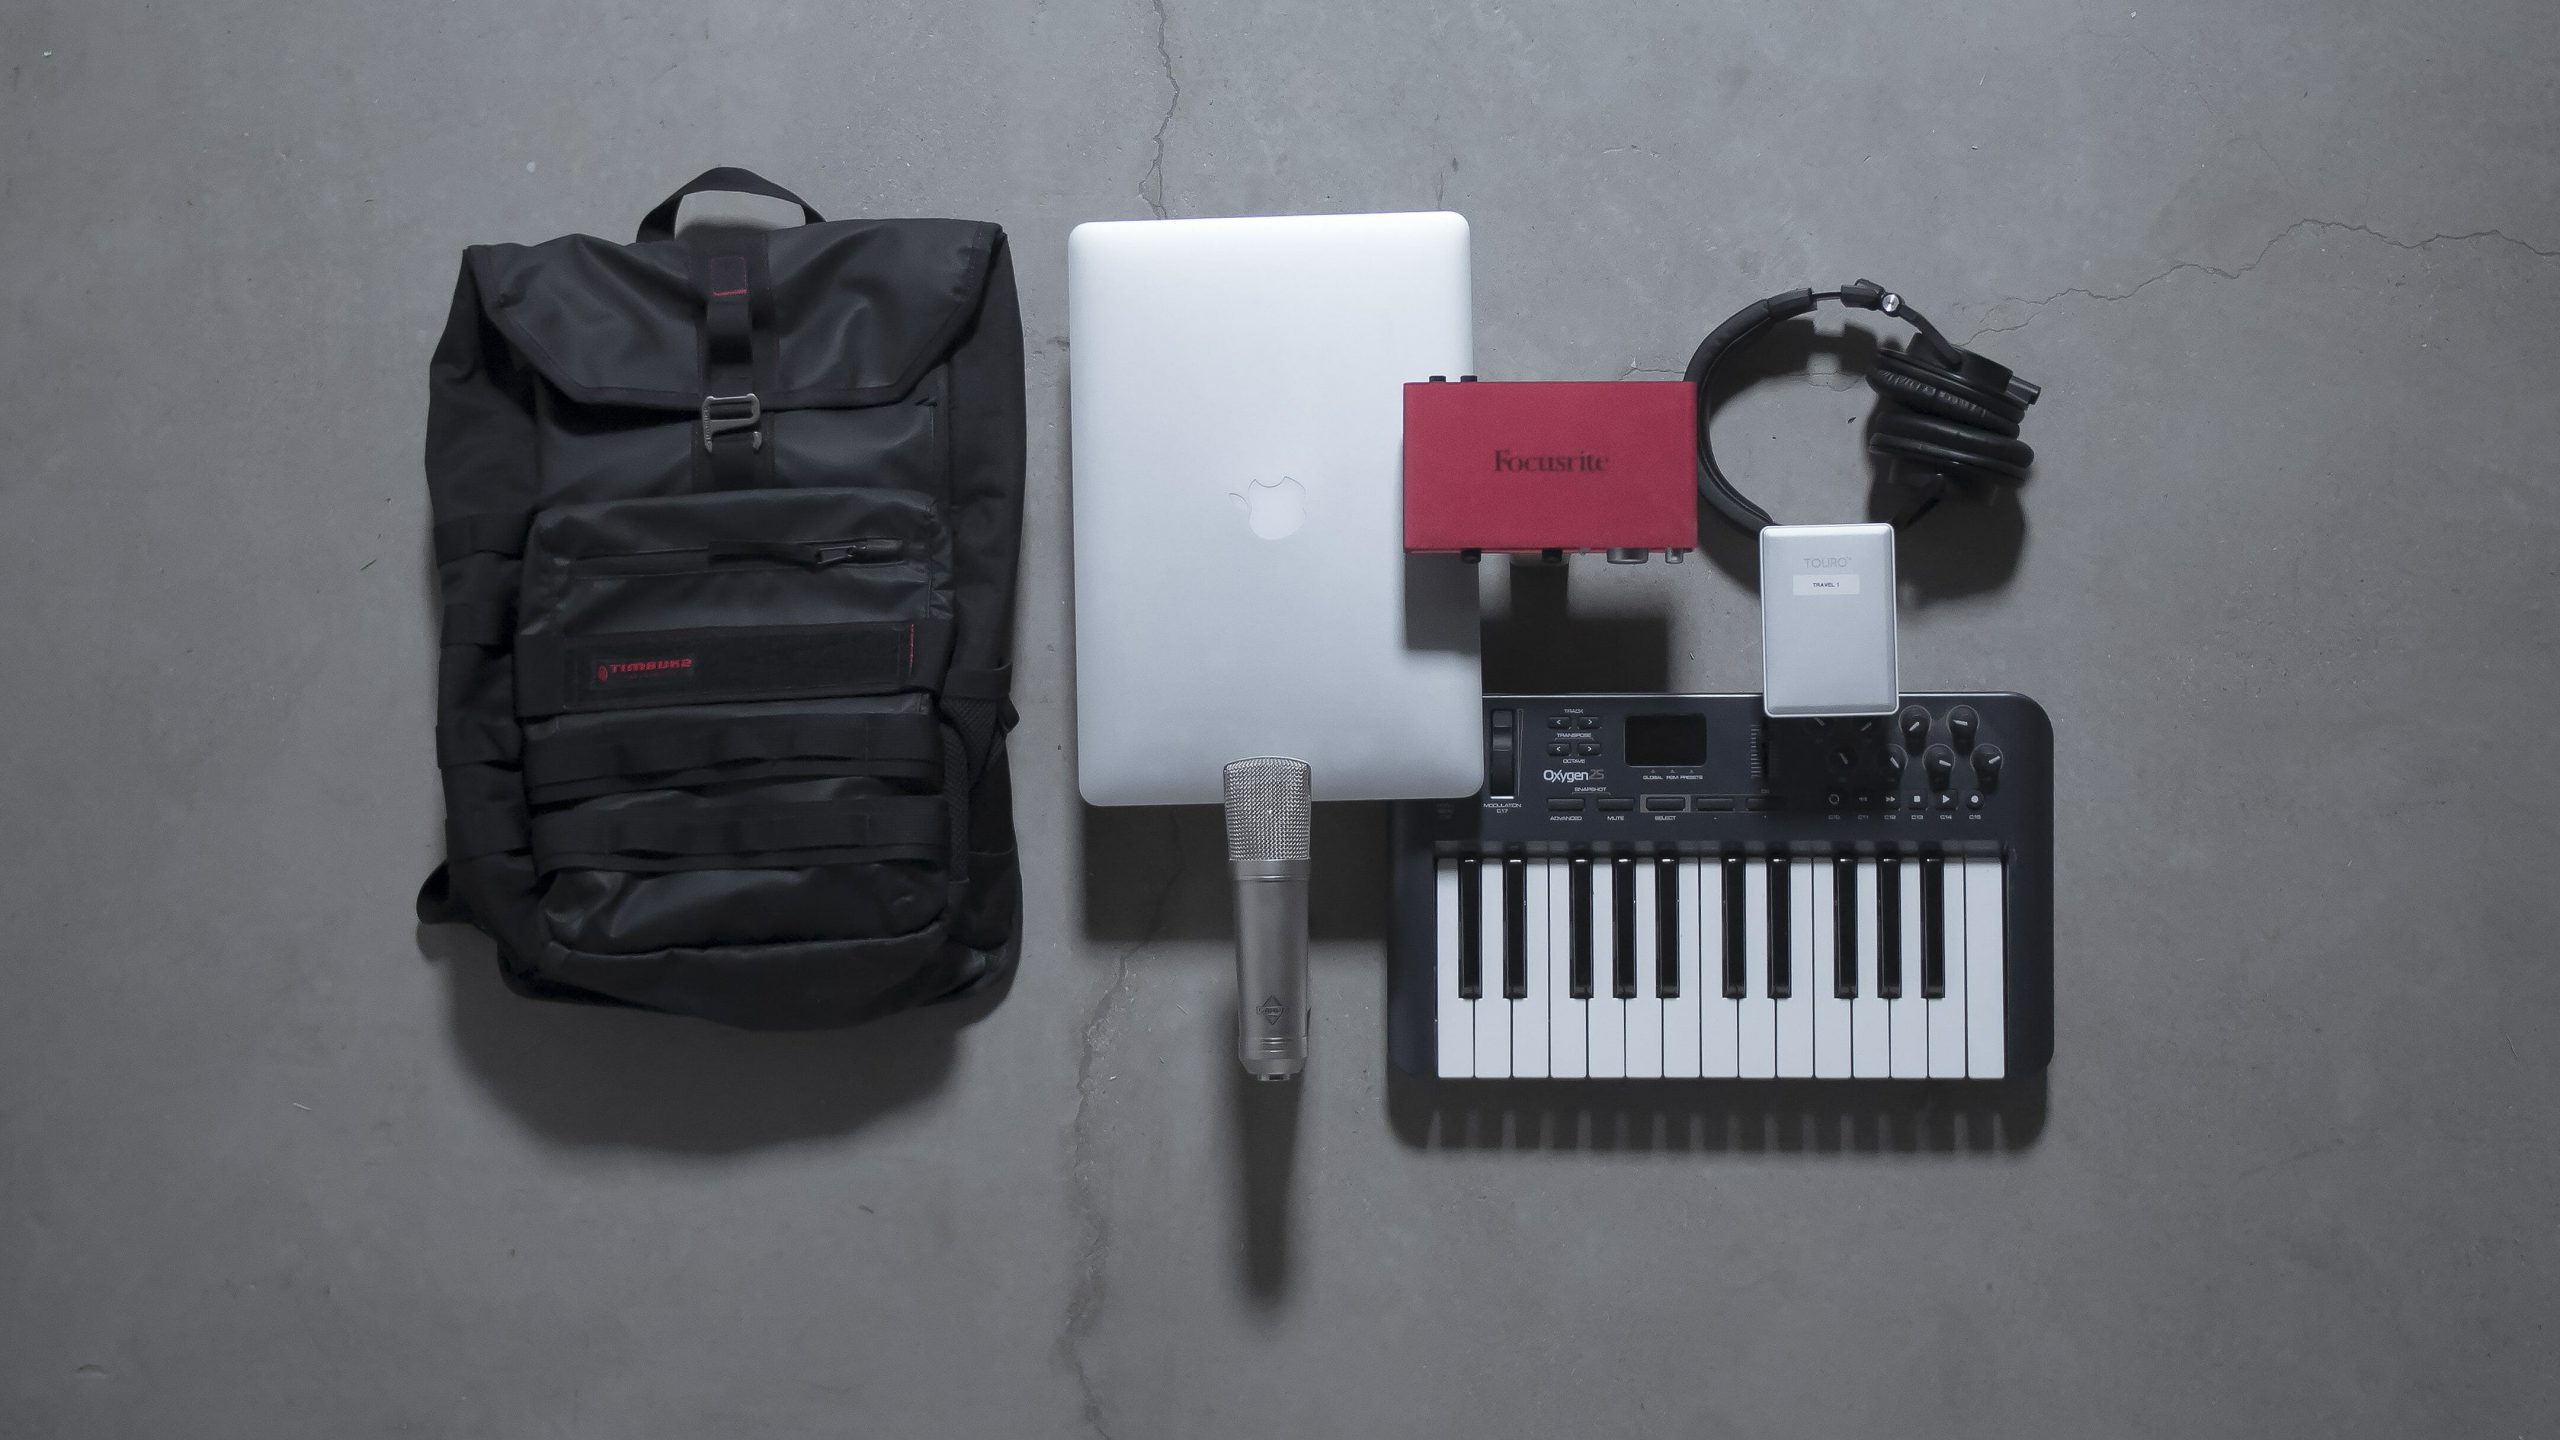 Travel essentials for musicians including a backpack, microphone, laptop, audio interface, headphones, portable keyboard, and portable hard drive